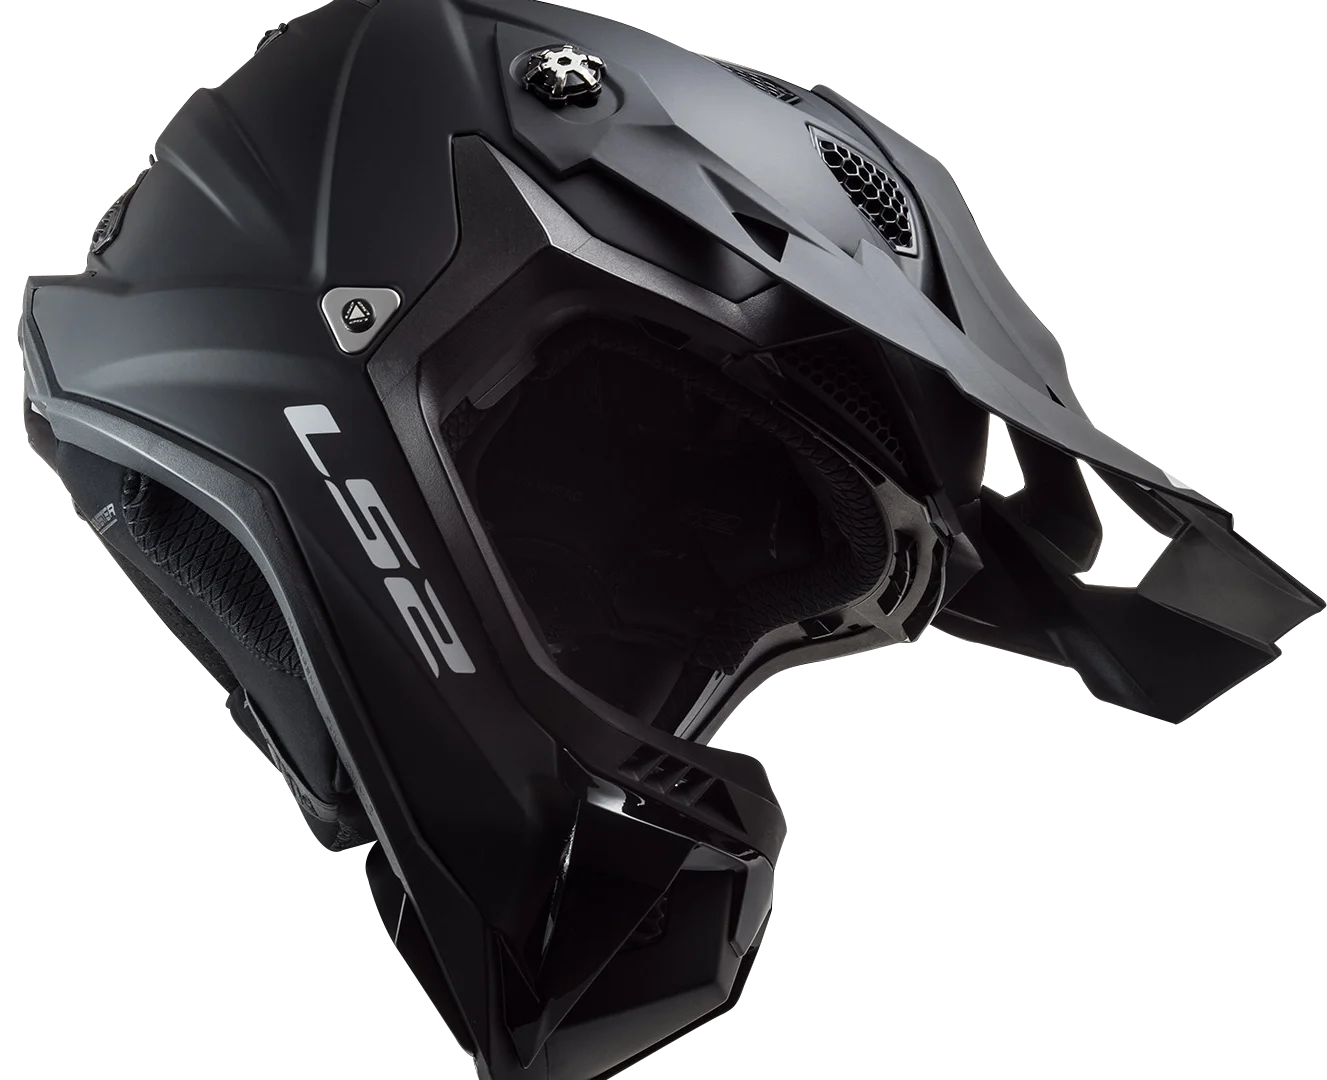 LS2 2021 | The New and Improved Subverter Evo Off-Road Helmets